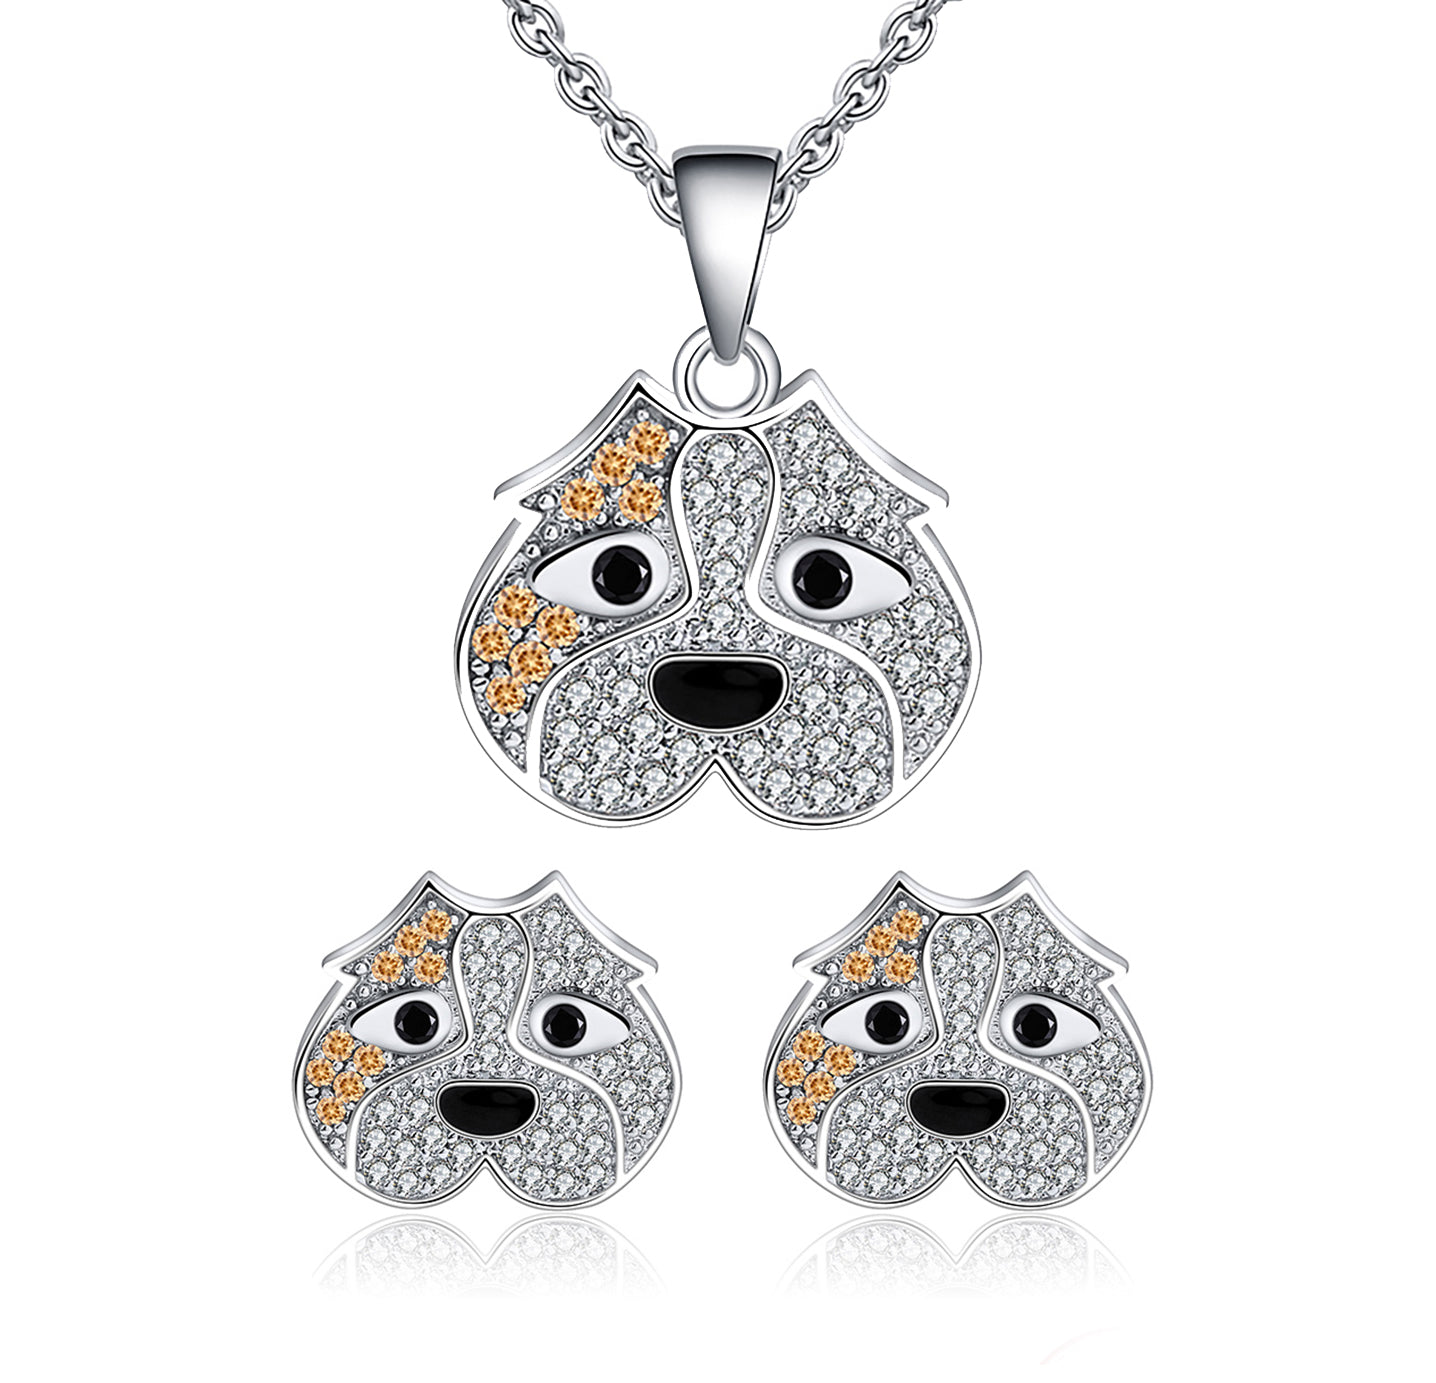 Pitbull Dog Necklace Earrings Set for Women or Girls Sterling Silver Cz Ginger Lyne Collection - Set